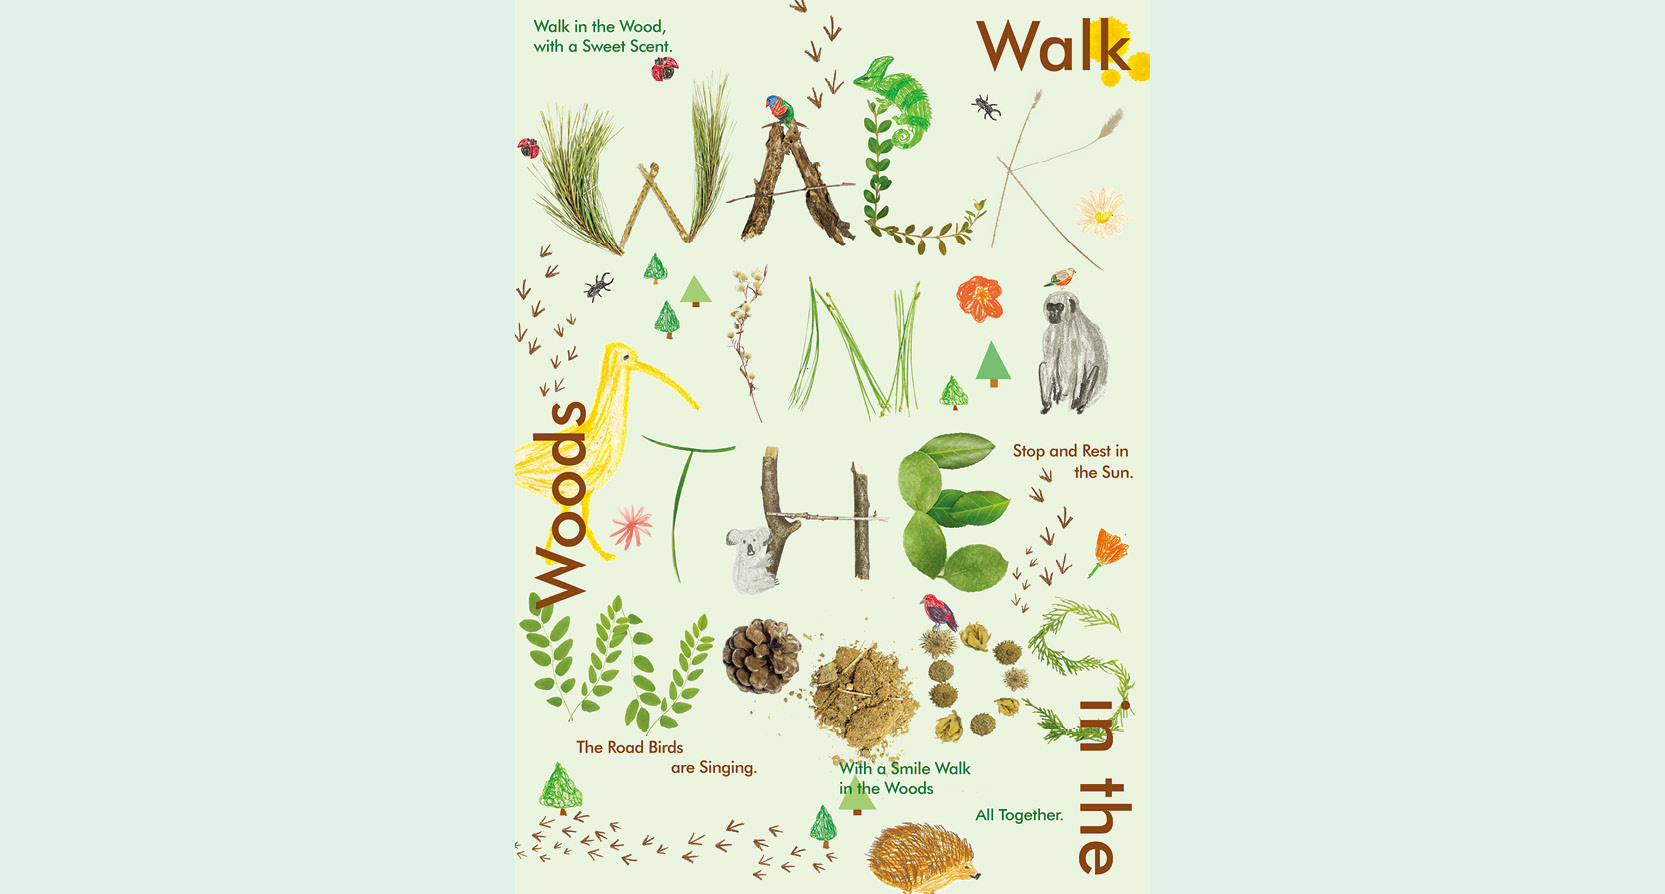 A poster showing plants and animals with the text: Walk in the Woods.